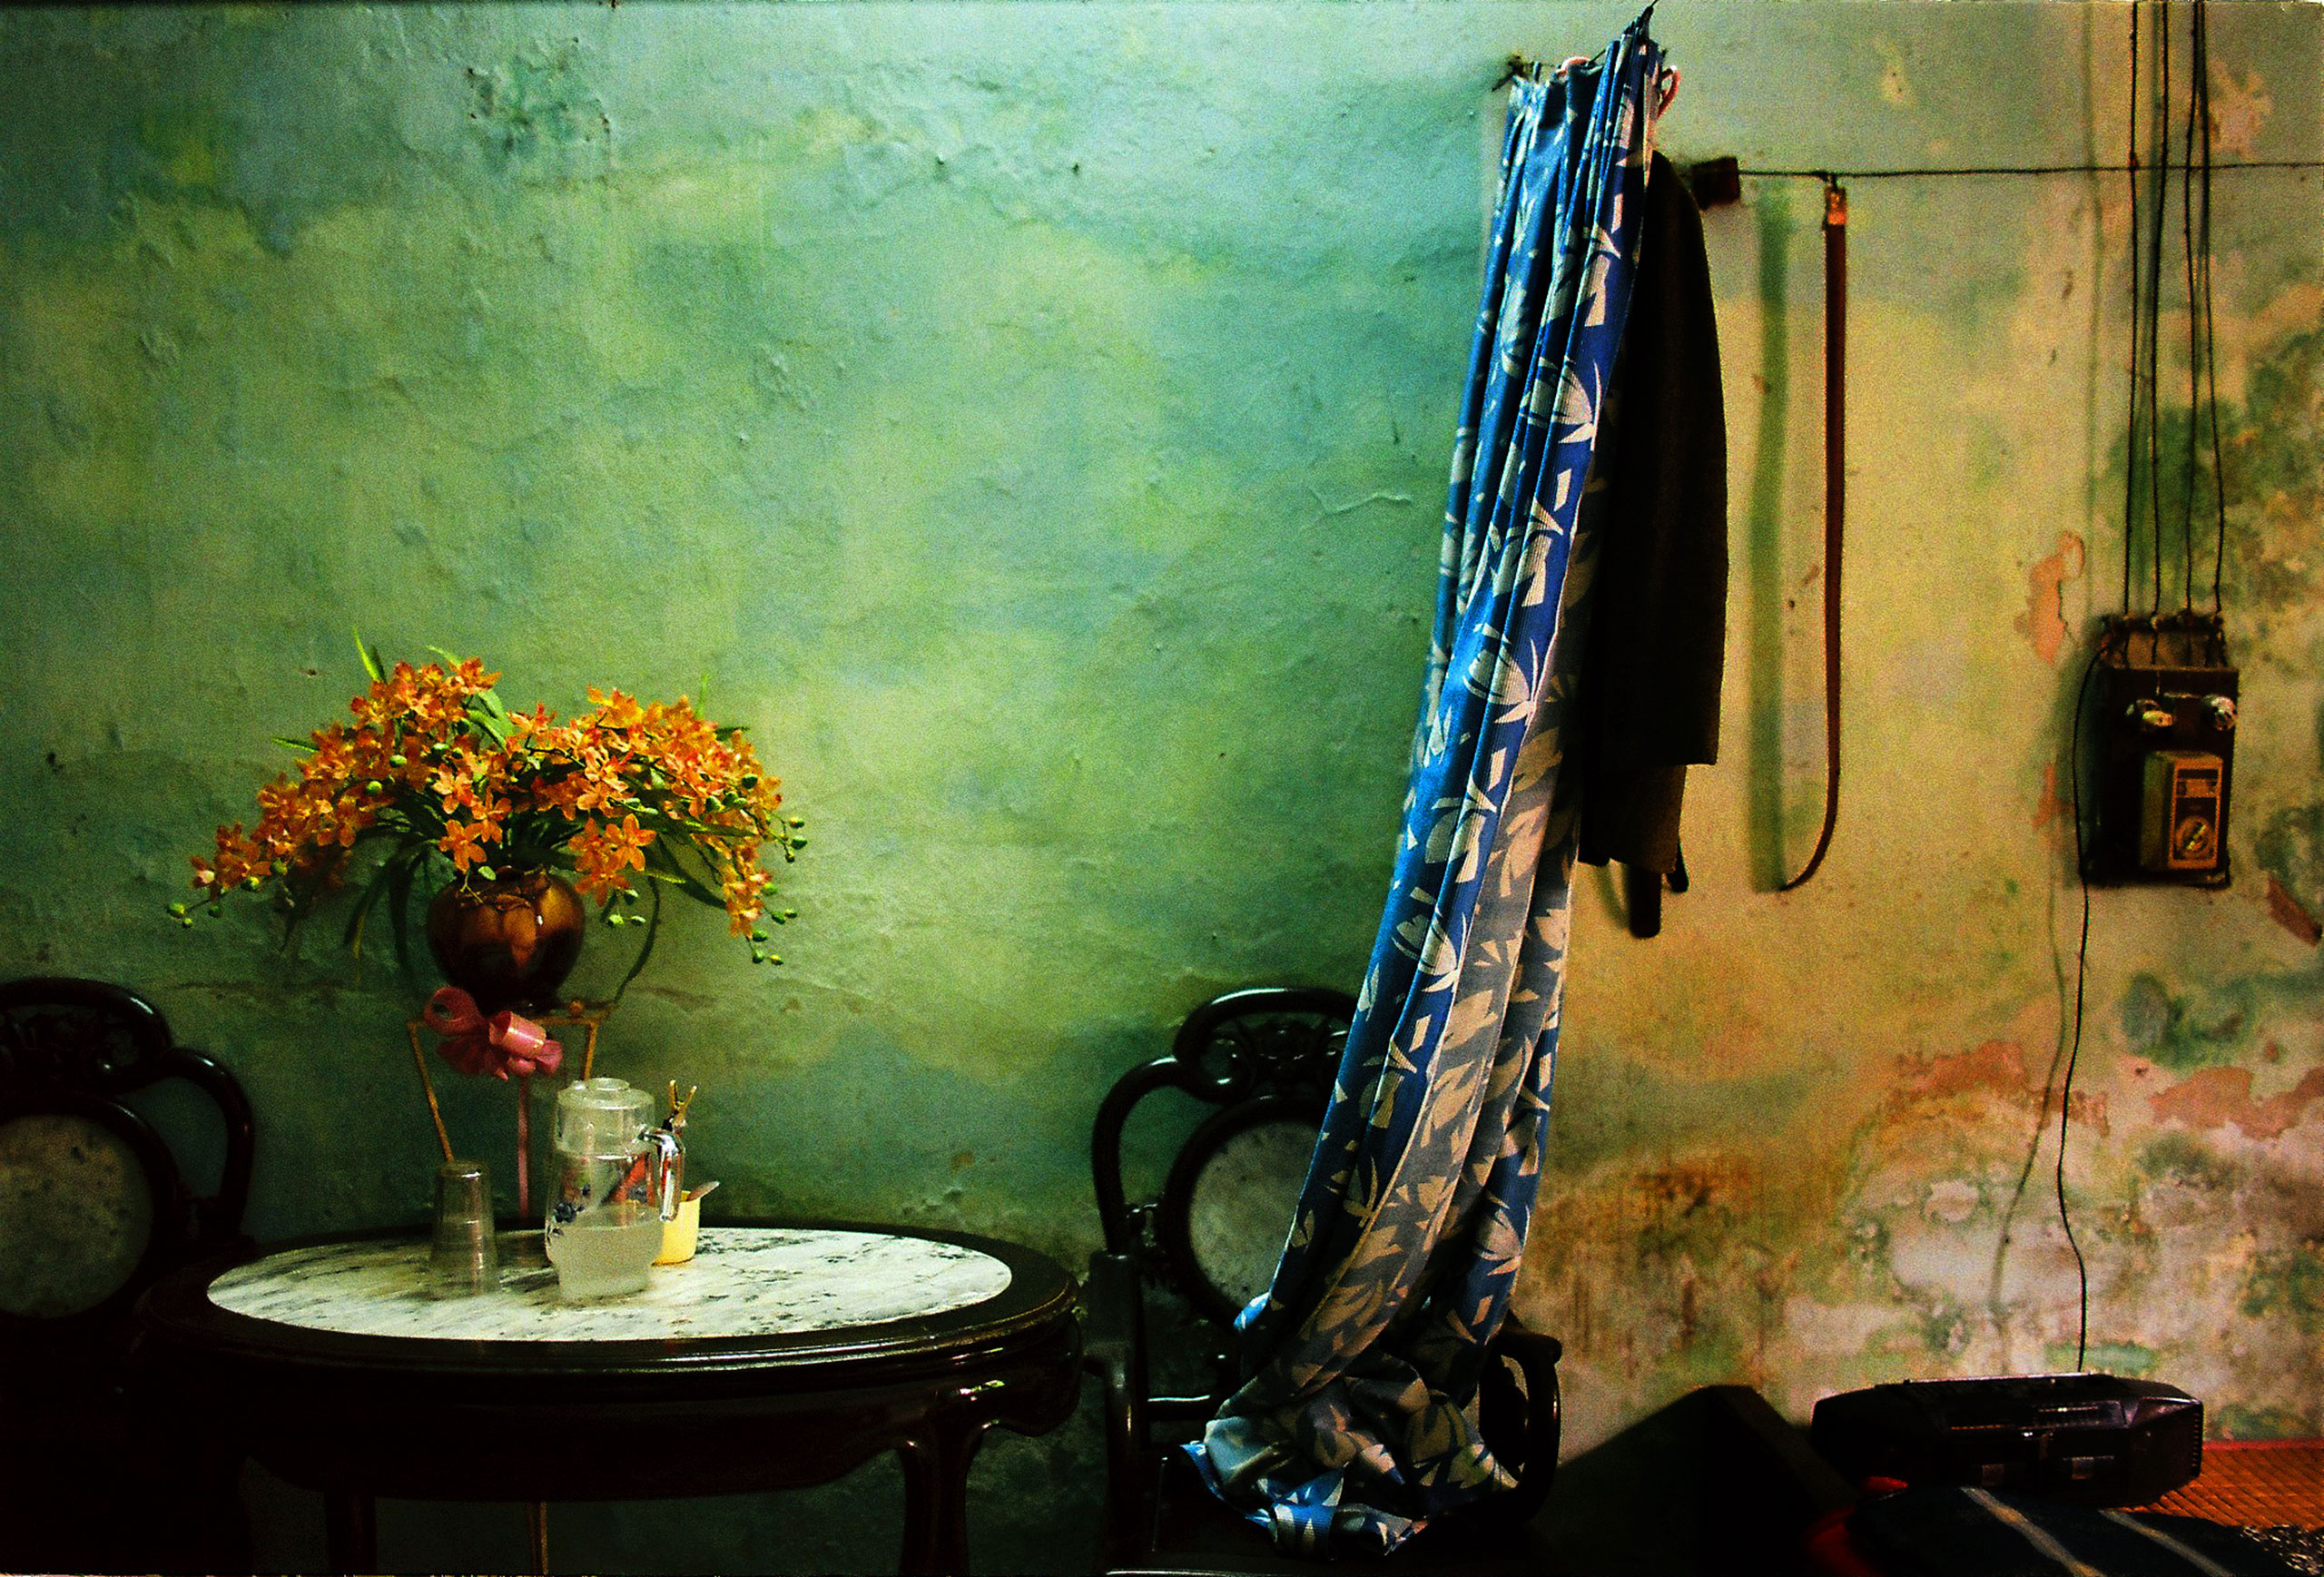 A bedroom decorated with flowers in an apartment located in Hanoi's old quarter, Feb. 1, 2010.